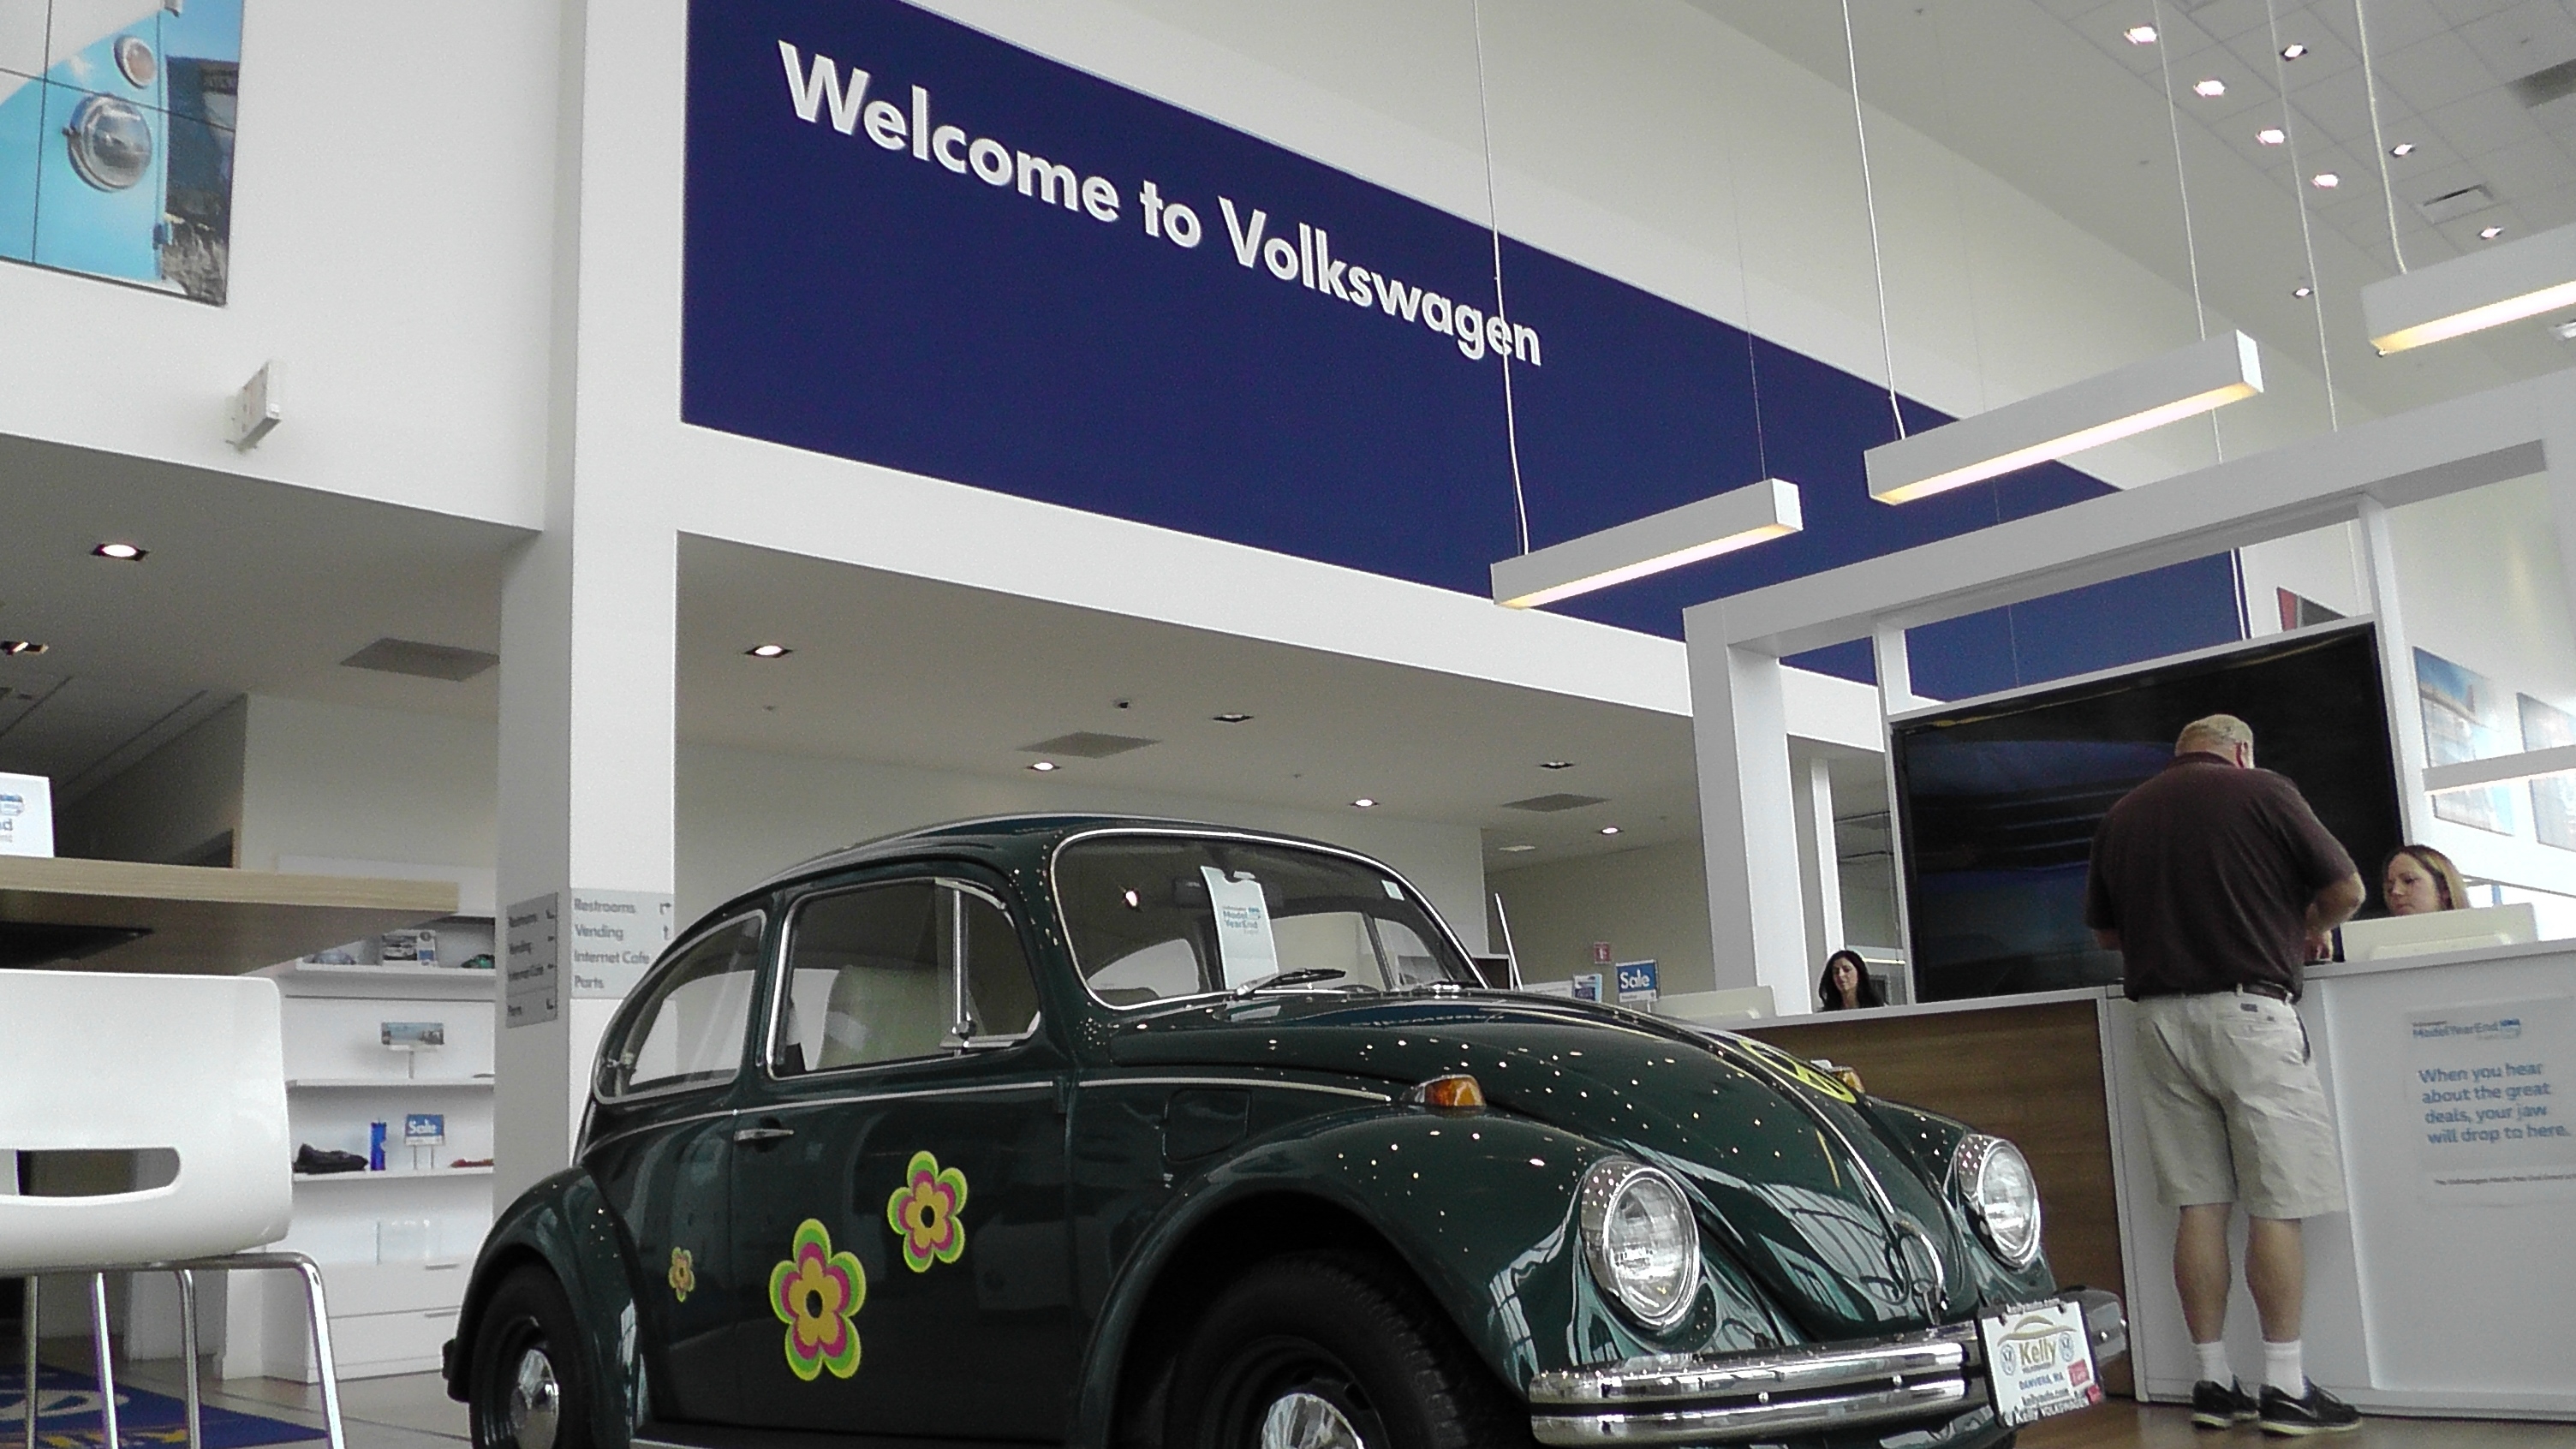 As you enter our Kelly Volkswagen showroom, you'll be welcomed by our receptionist, signage and beautiful inventory. Browse our available showroom models, speak with a Product Specialist, or just relax with a refreshment in our comfortable lounge area.